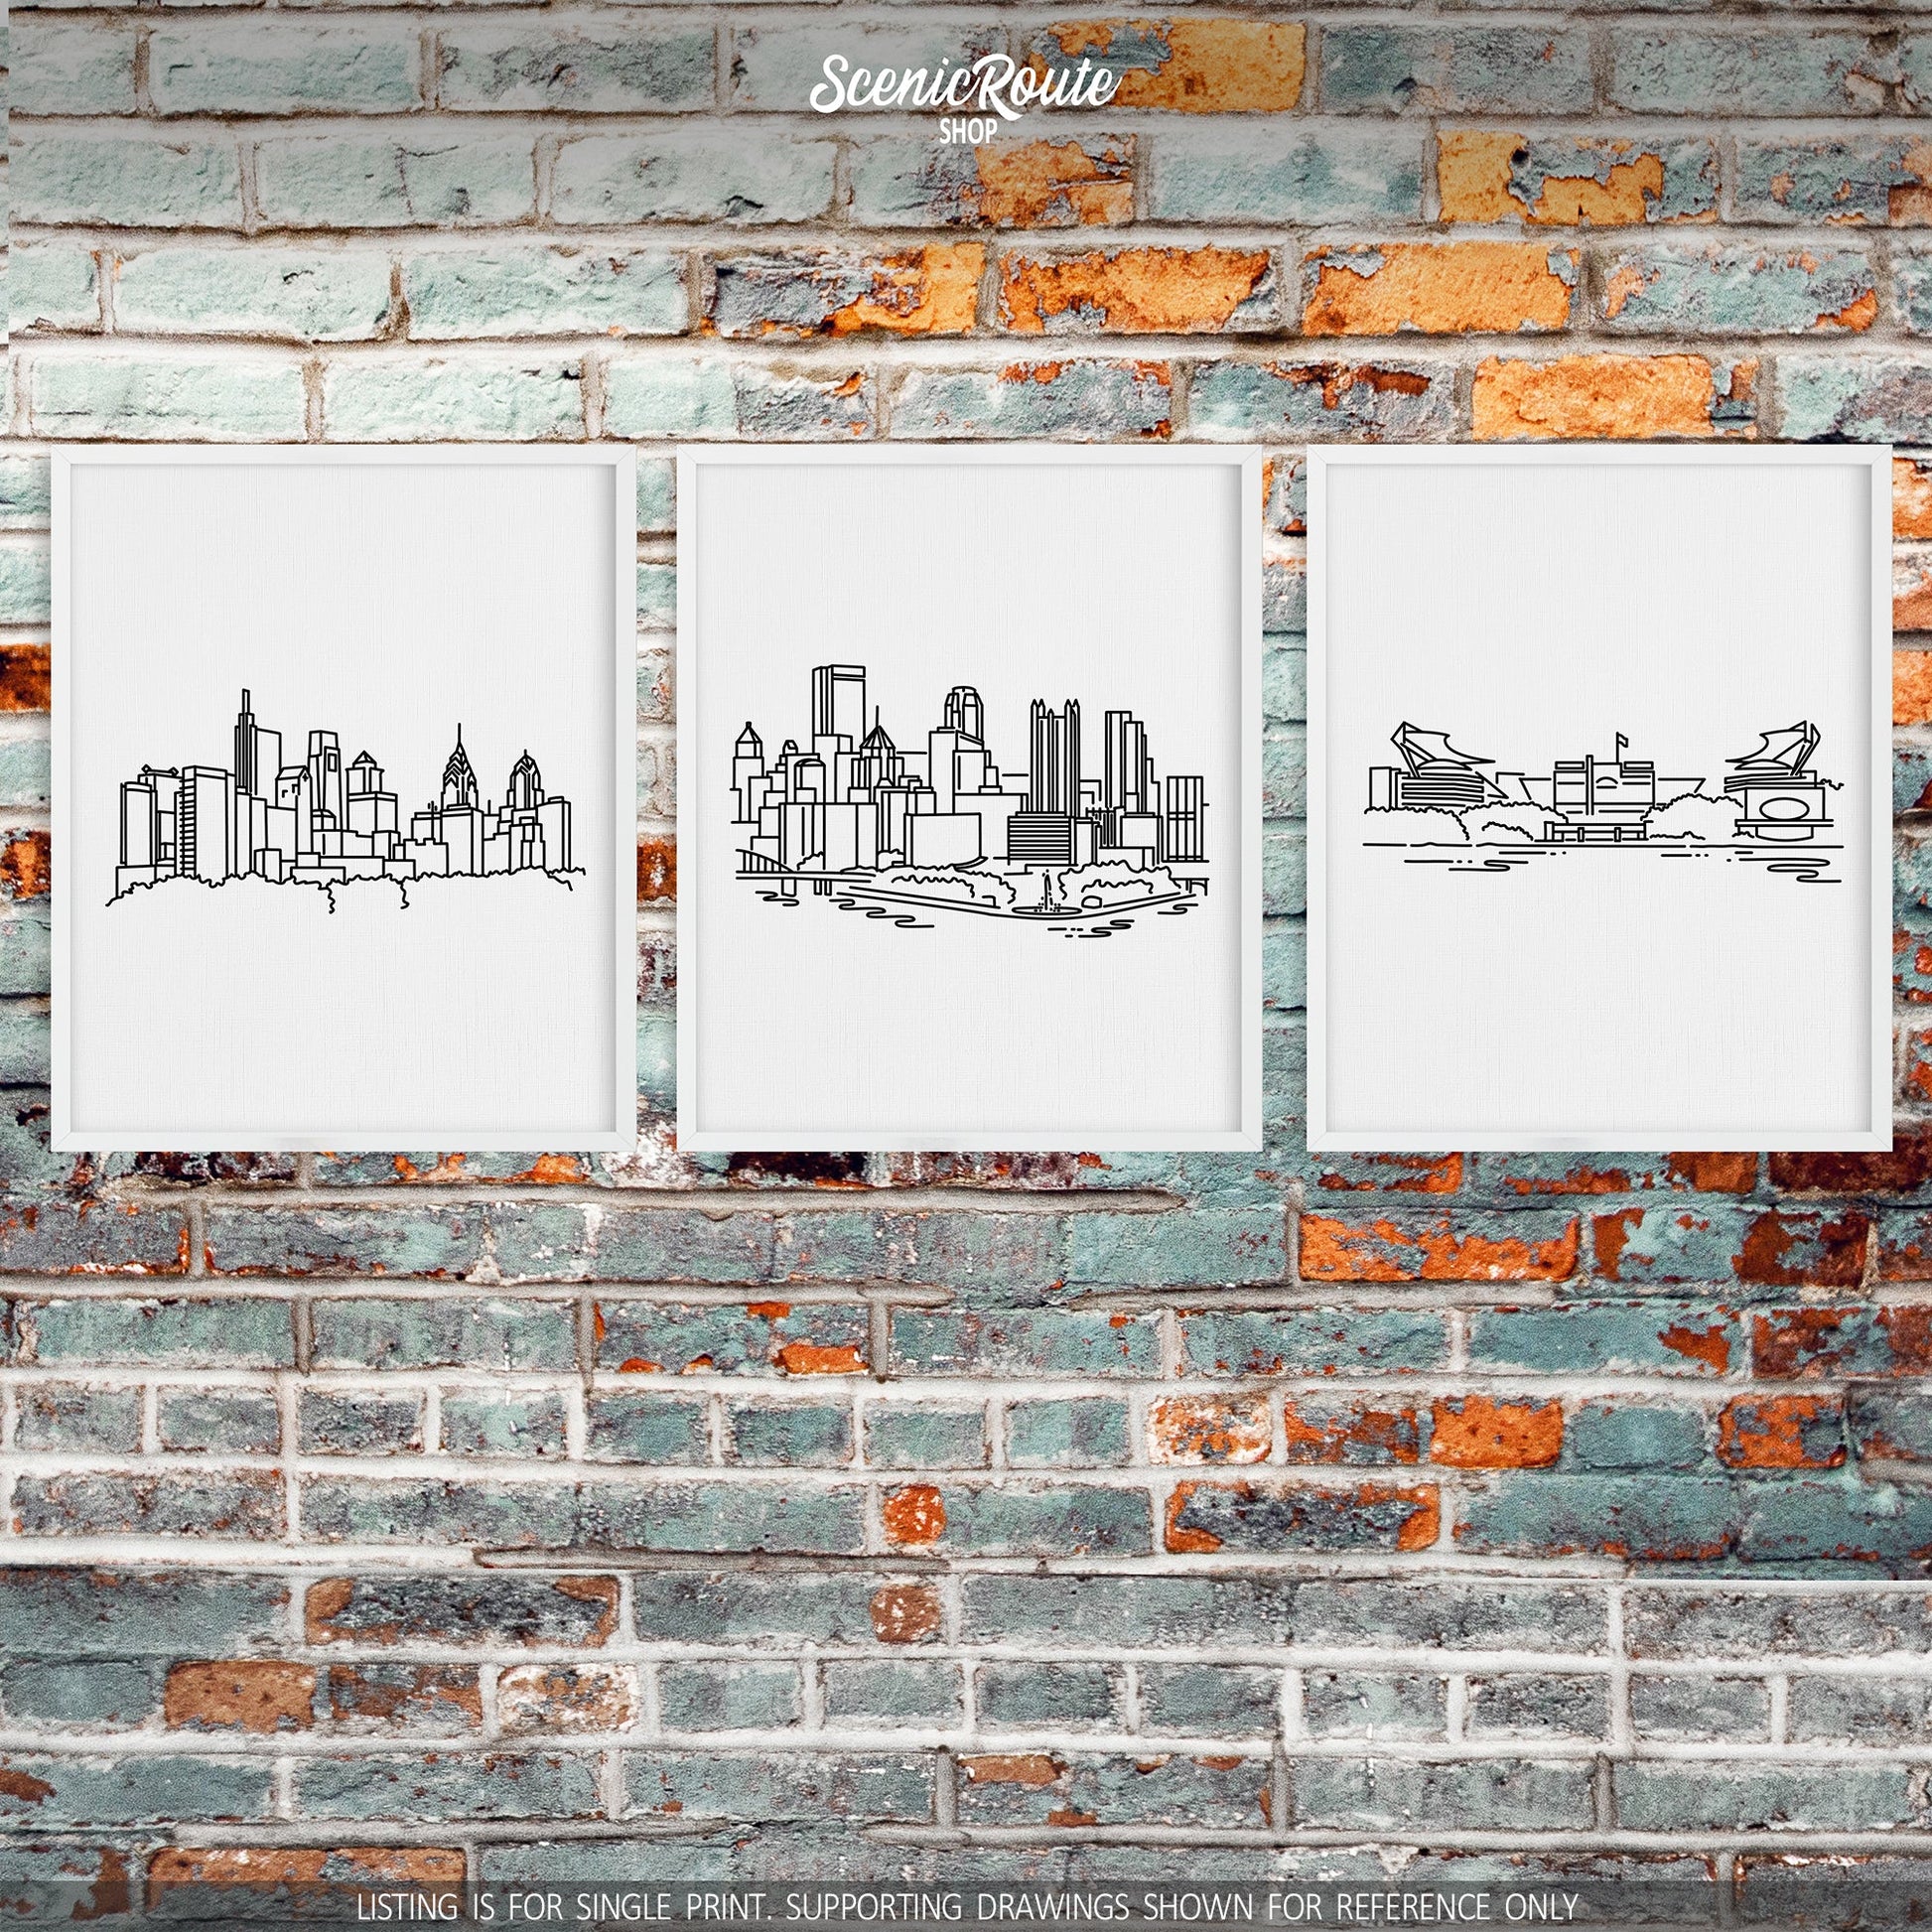 A group of three framed drawings on a brick wall. The line art drawings include the Philadelphia Skyline, Pittsburgh Skyline, and Pittsburgh Steelers Stadium